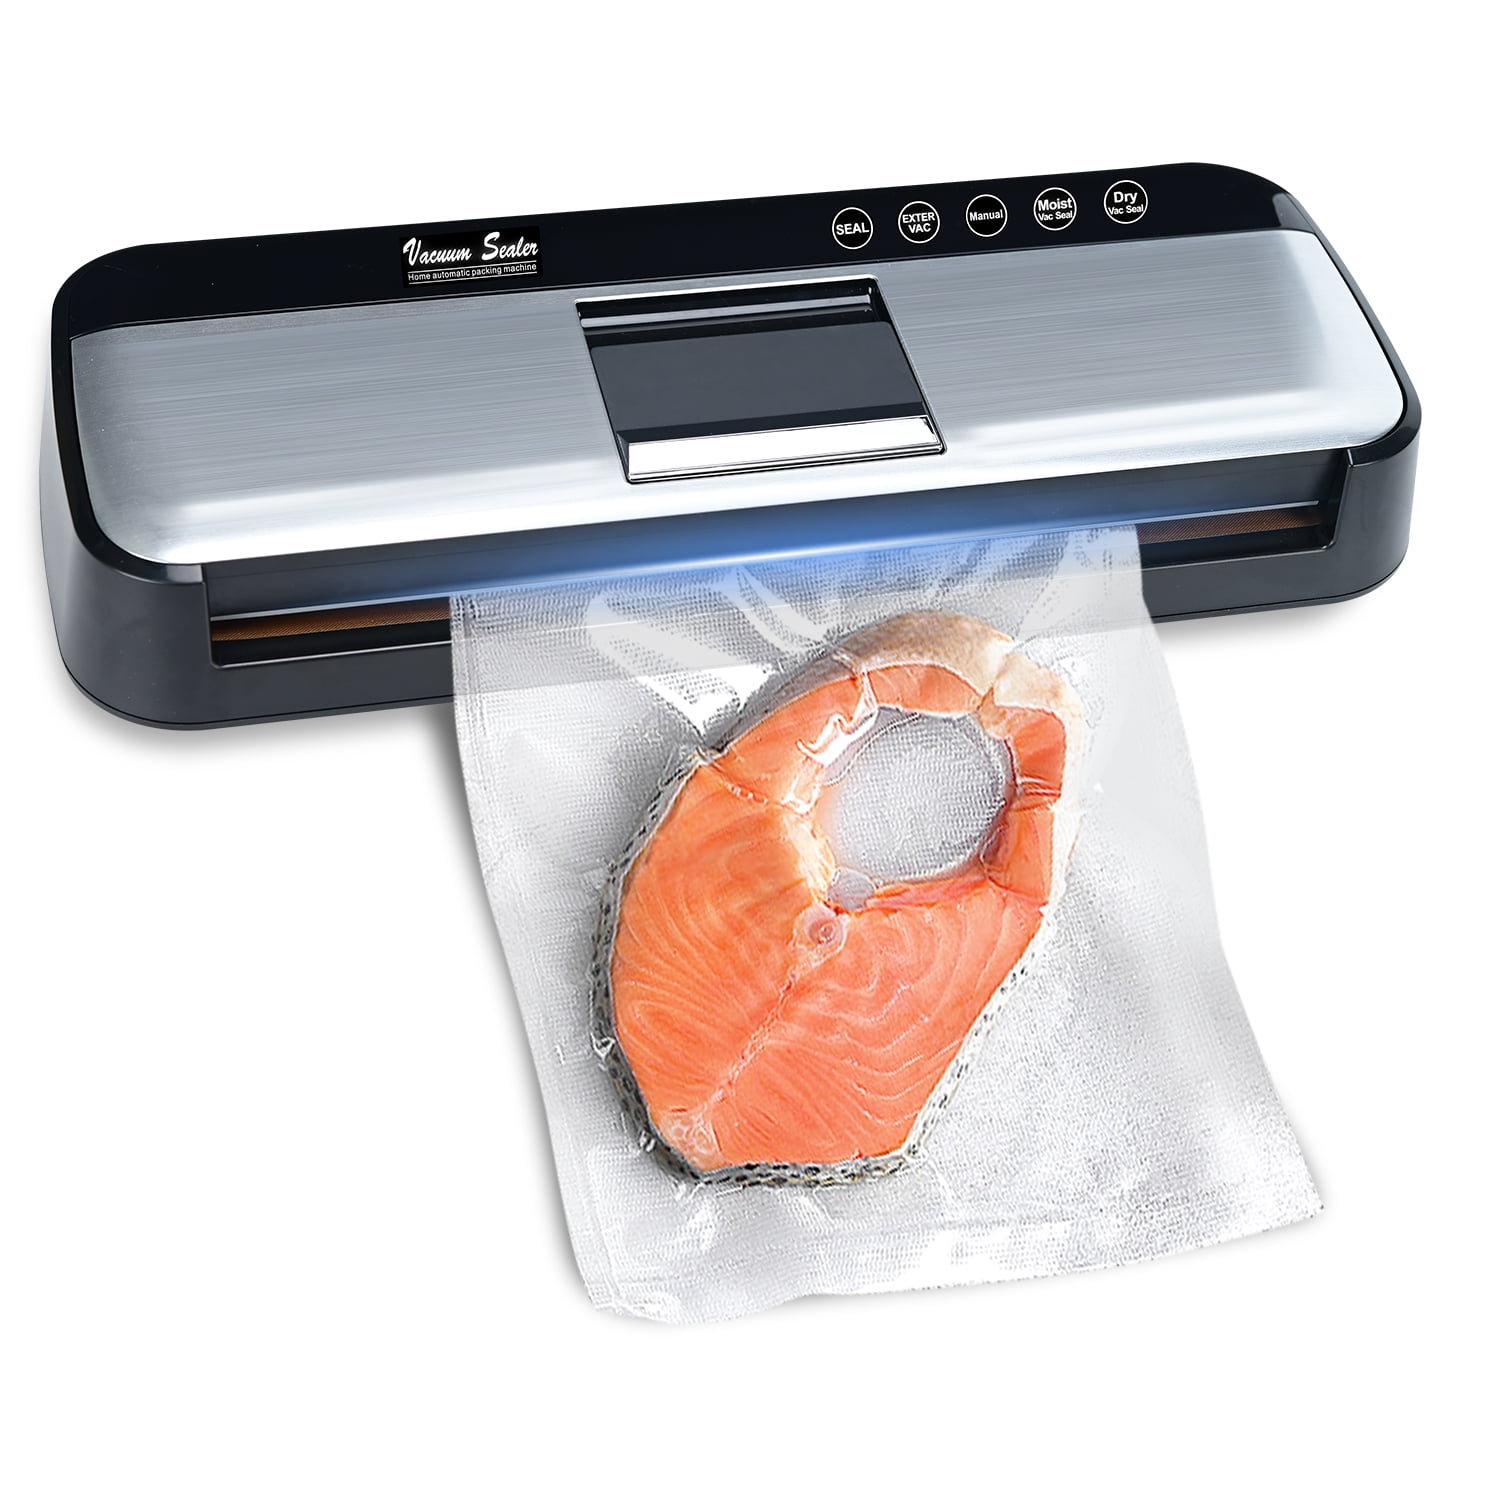  Vacuum Sealer Machine, GHVACZS Lightweight Food Vacuum Sealer  Compact Machine for Food Preservation, Automatic Food Sealer Saver Vacuum  Machine Easy to Use, Clean and Storage for Home Kitchen (Silver): Home 